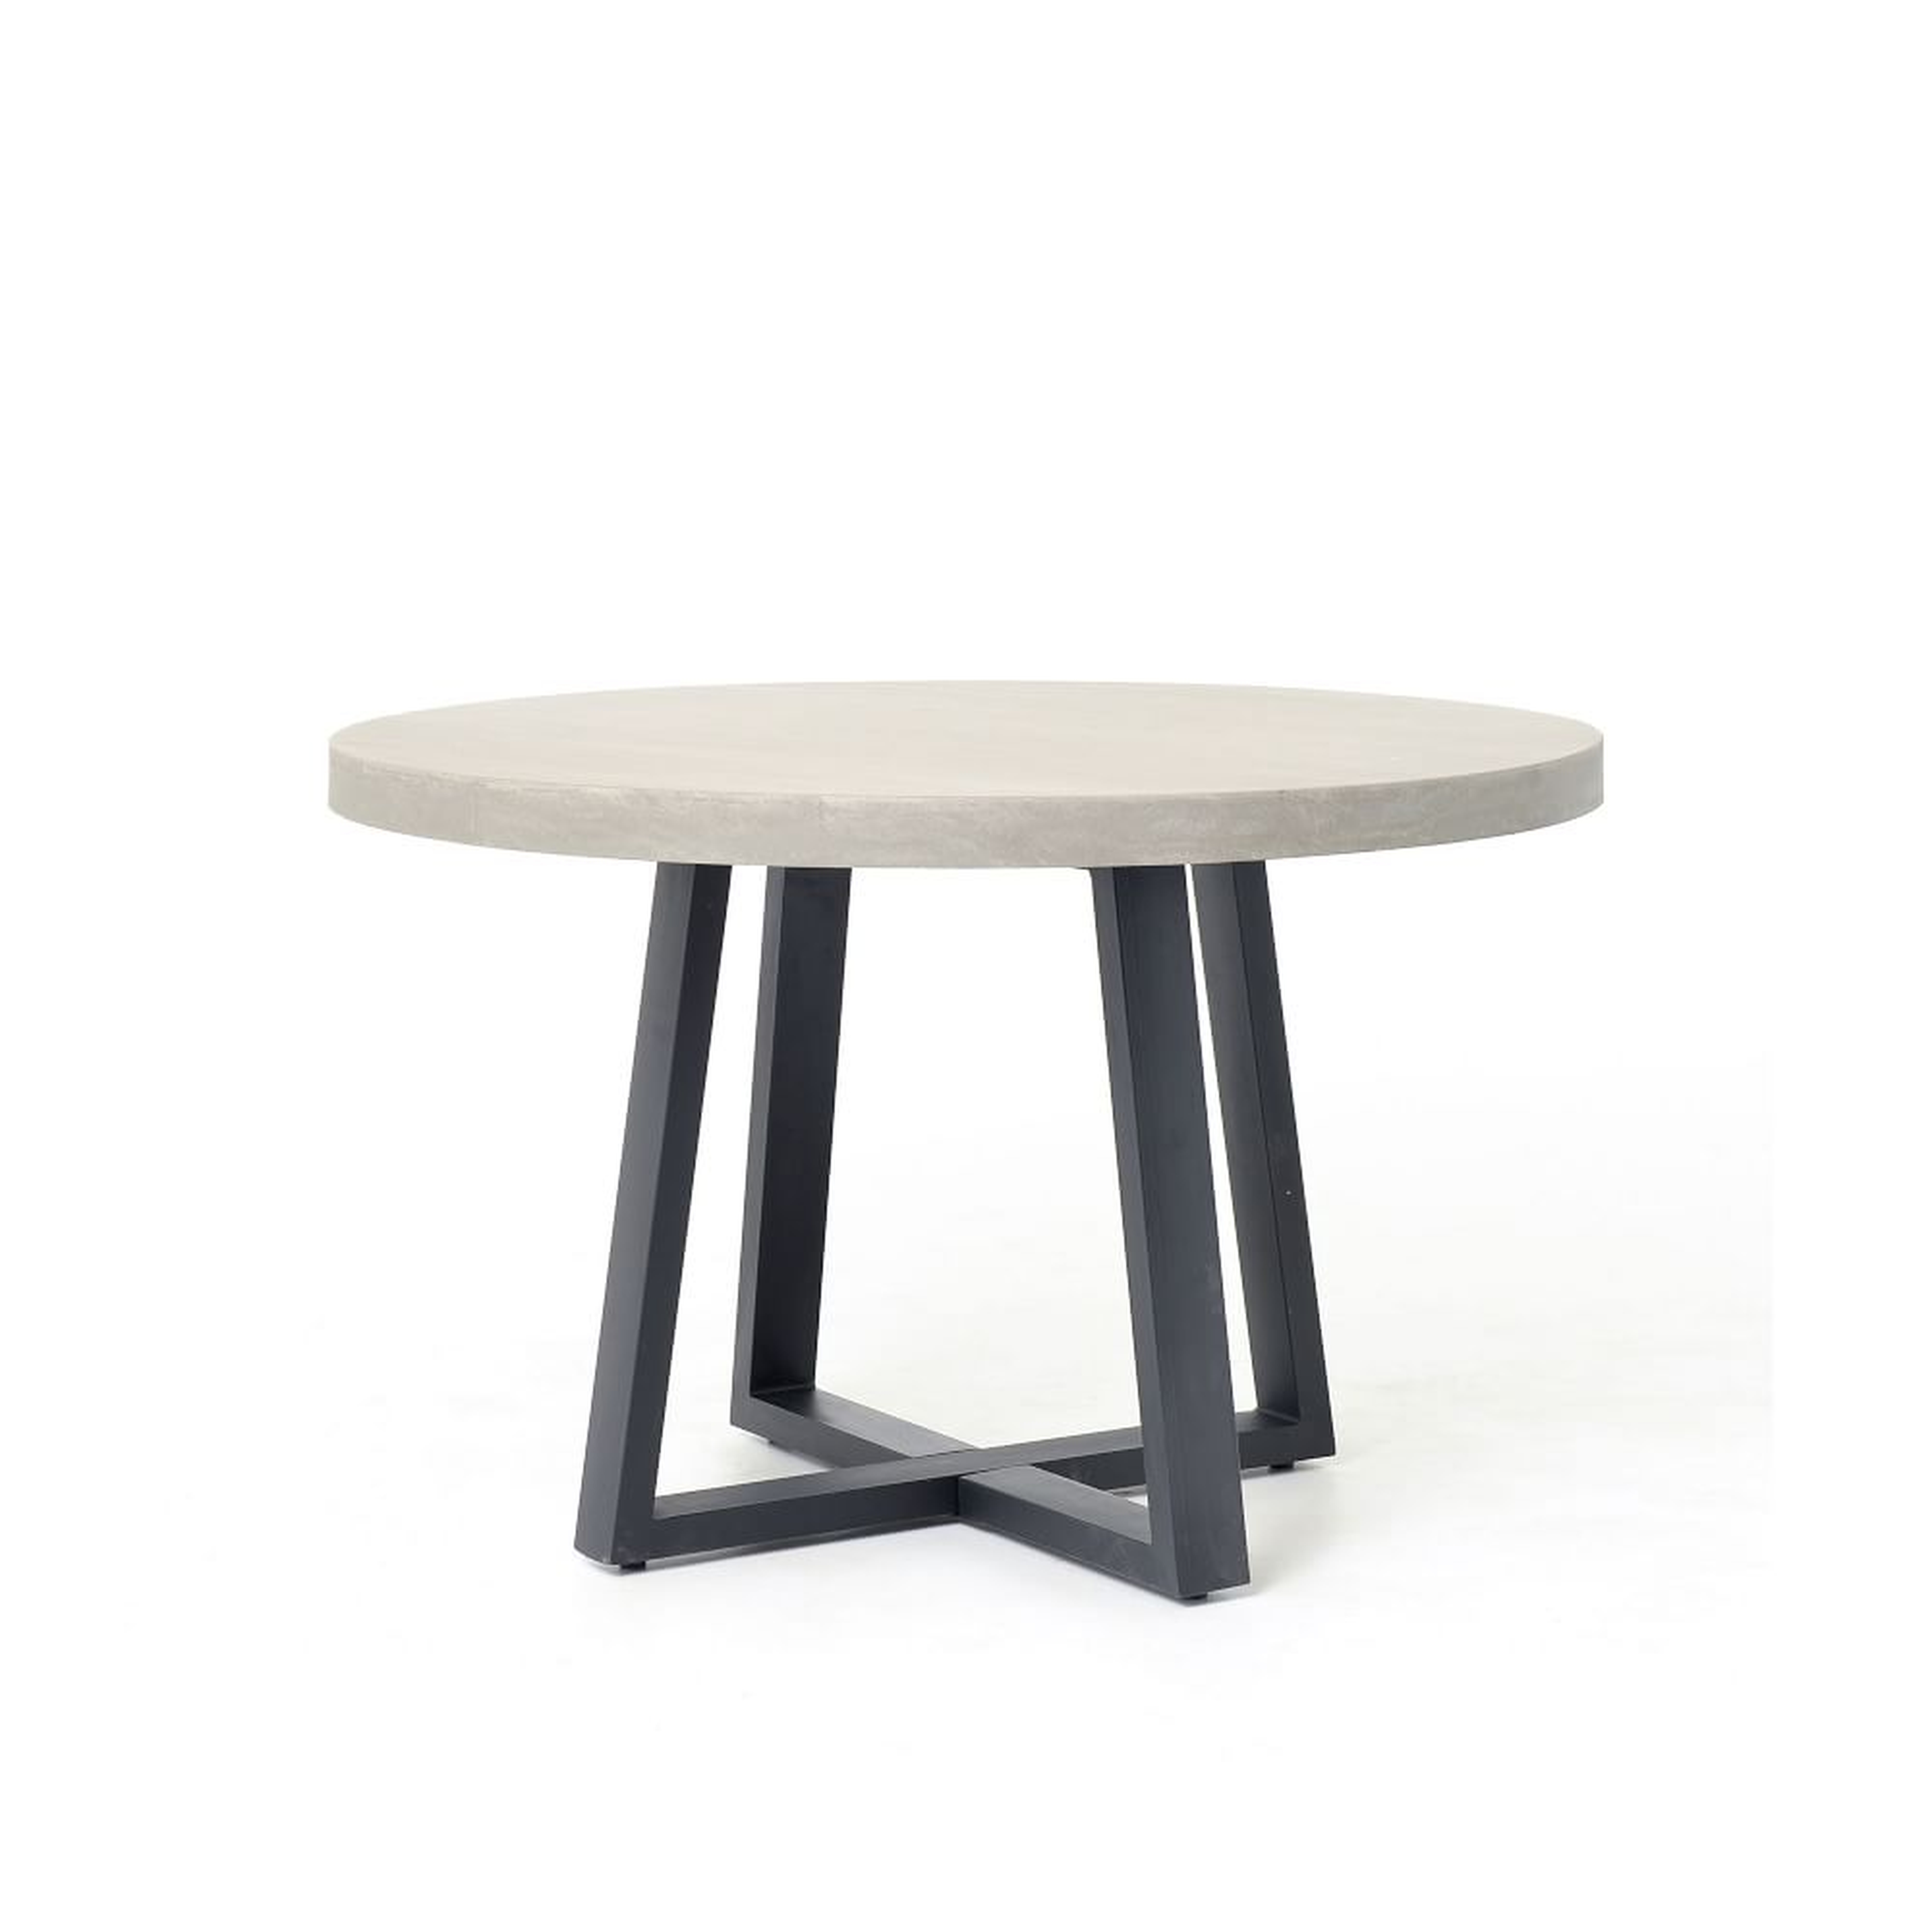 Slab Outdoor 48" Round Dining Table - West Elm